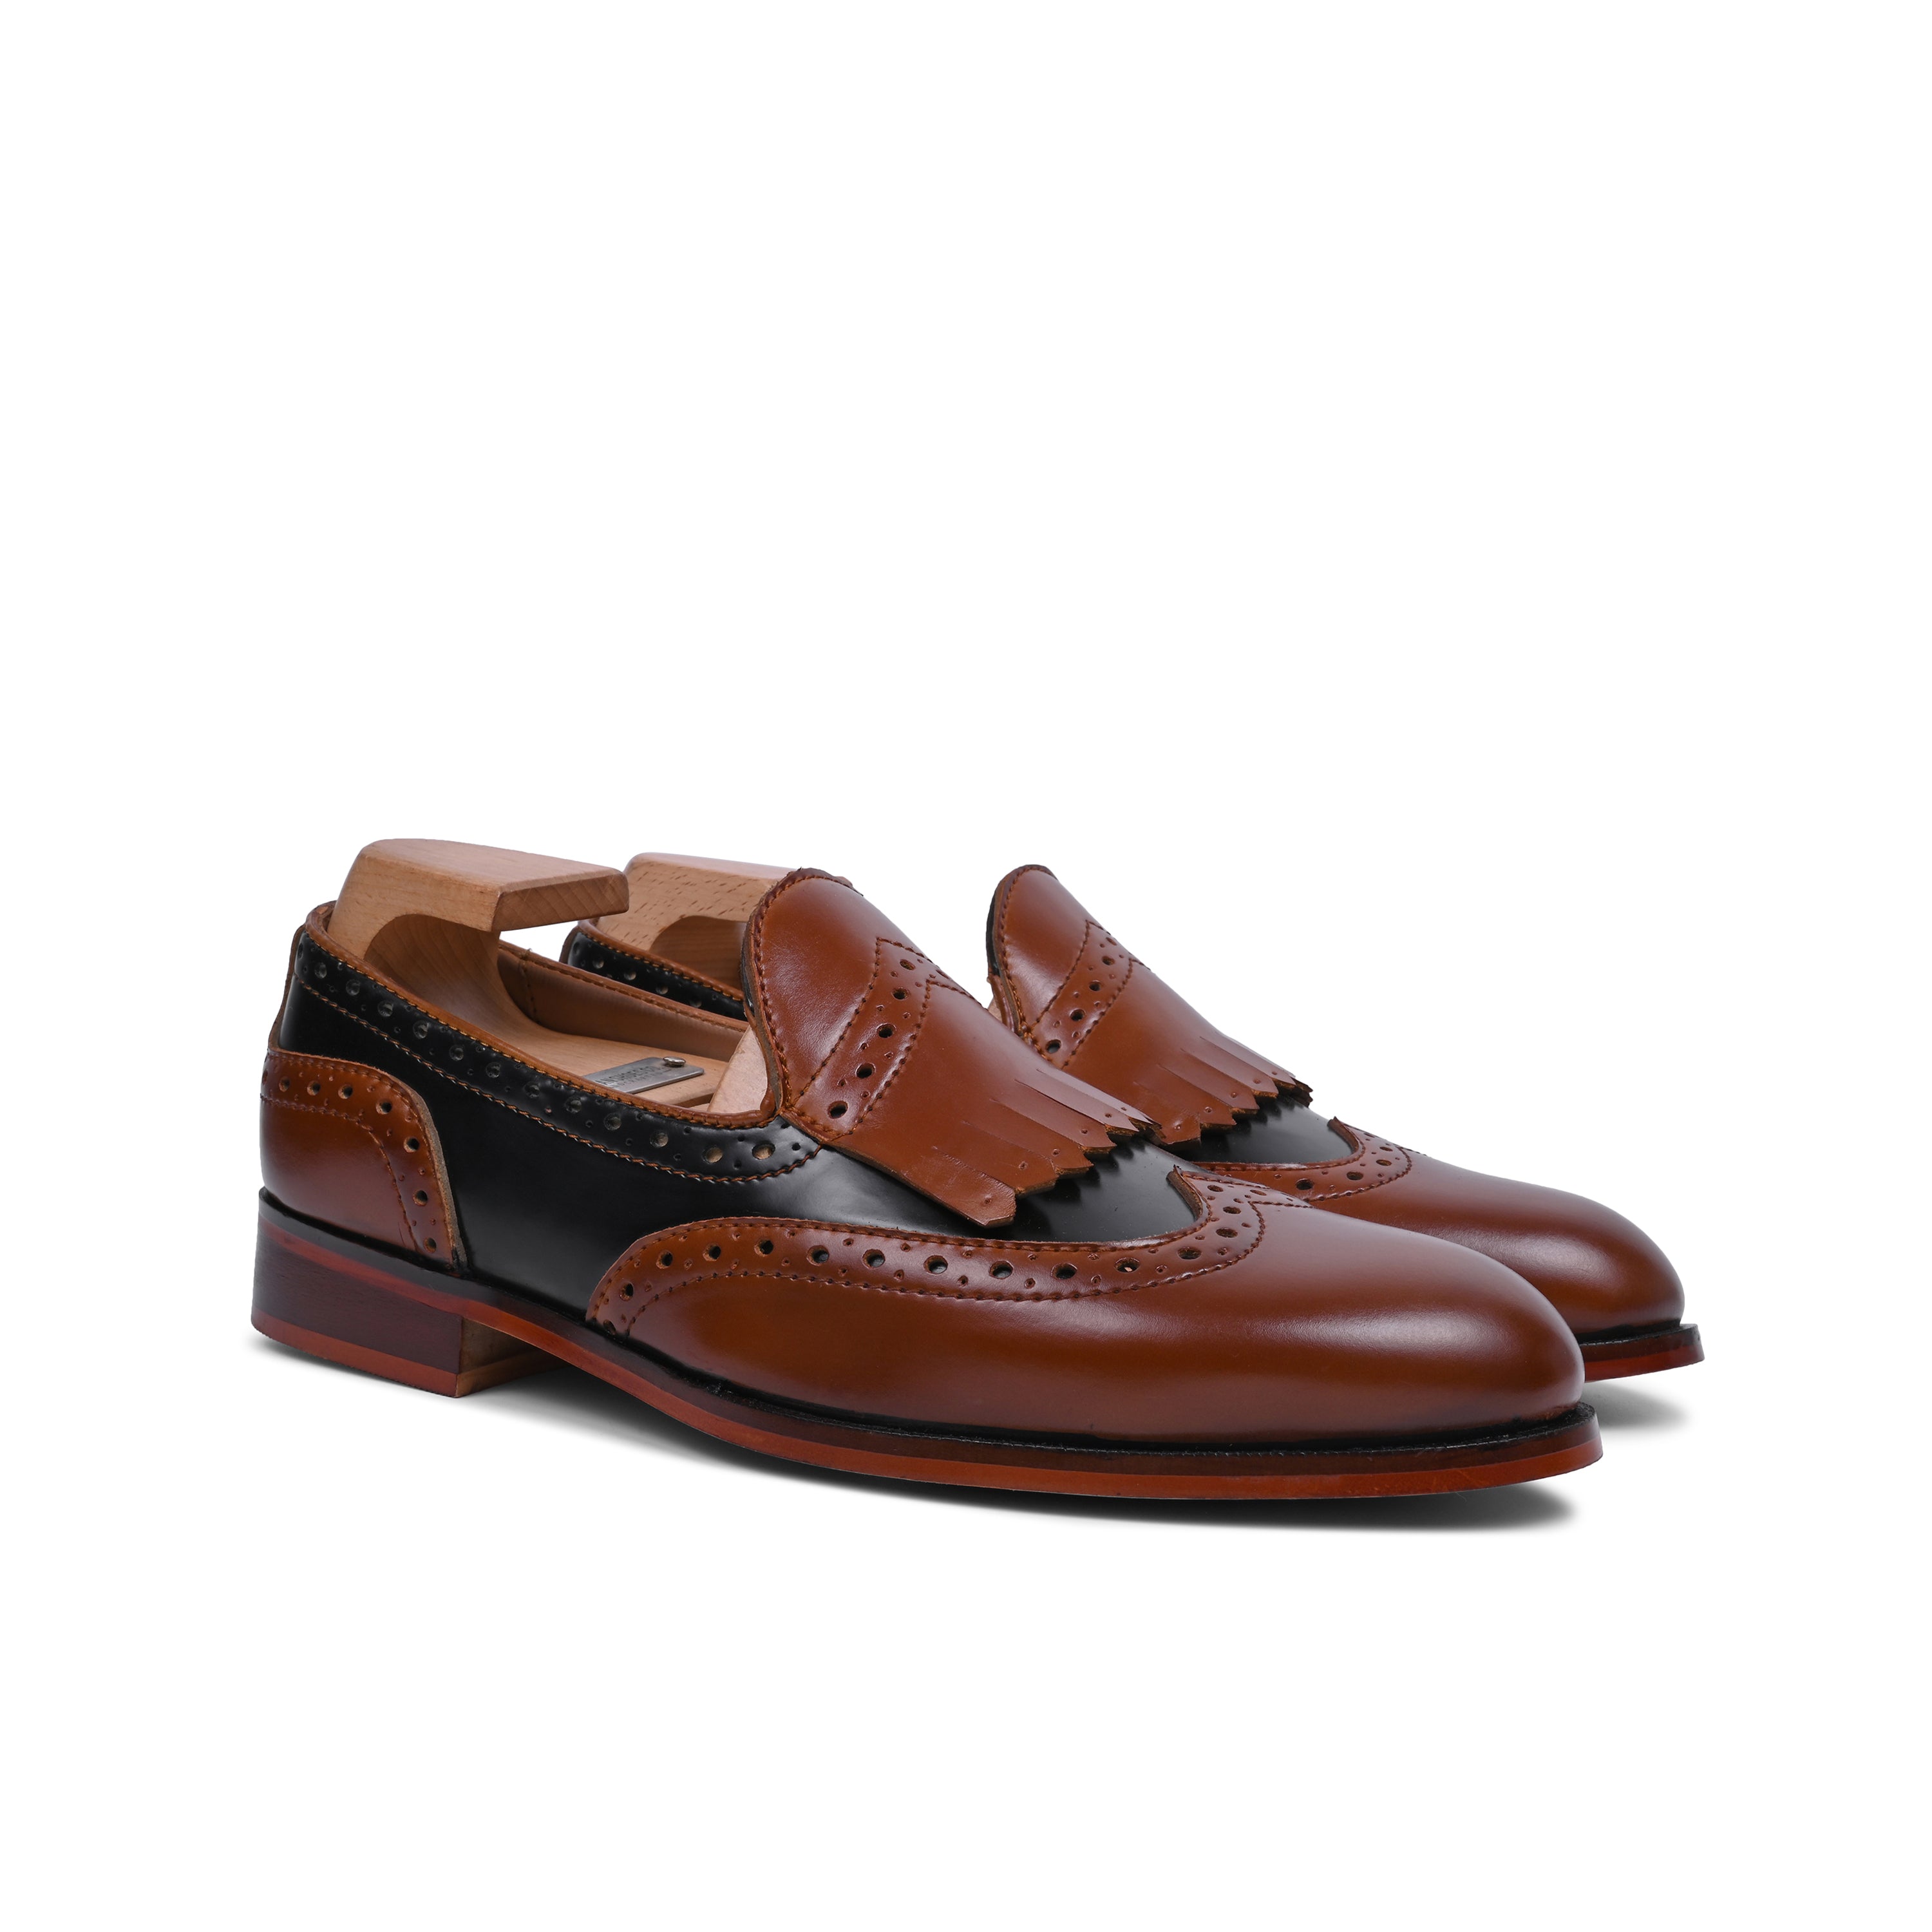 Urban Uprising Loafers Shoes